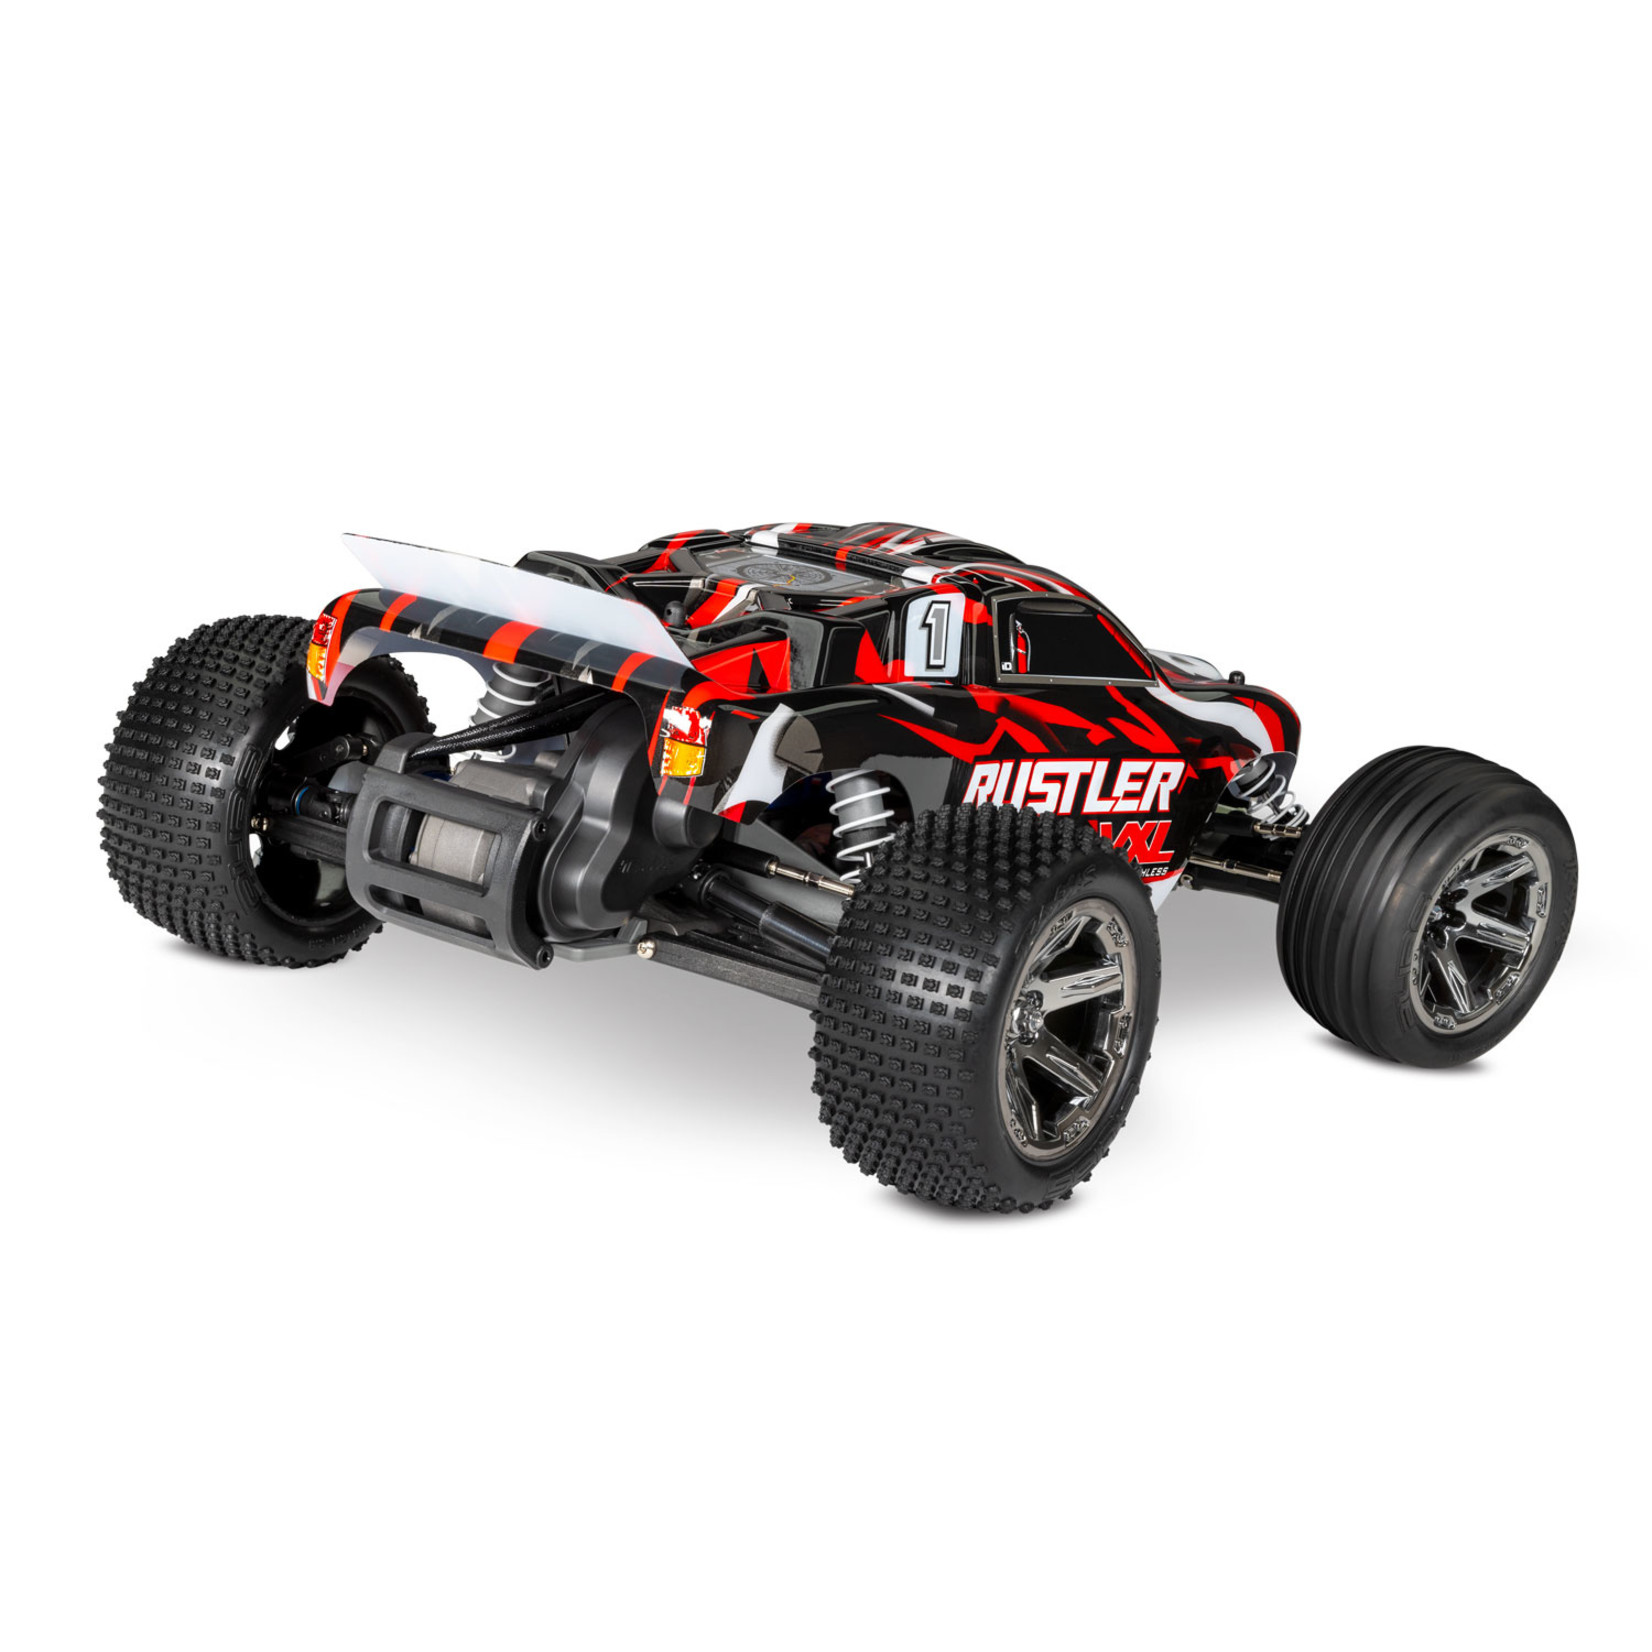 Traxxas Rustler VXL:  1/10 Scale 2WD Brushless Stadium Truck with Magnum 272R transmission and Traxxas Stability Management (TSM)